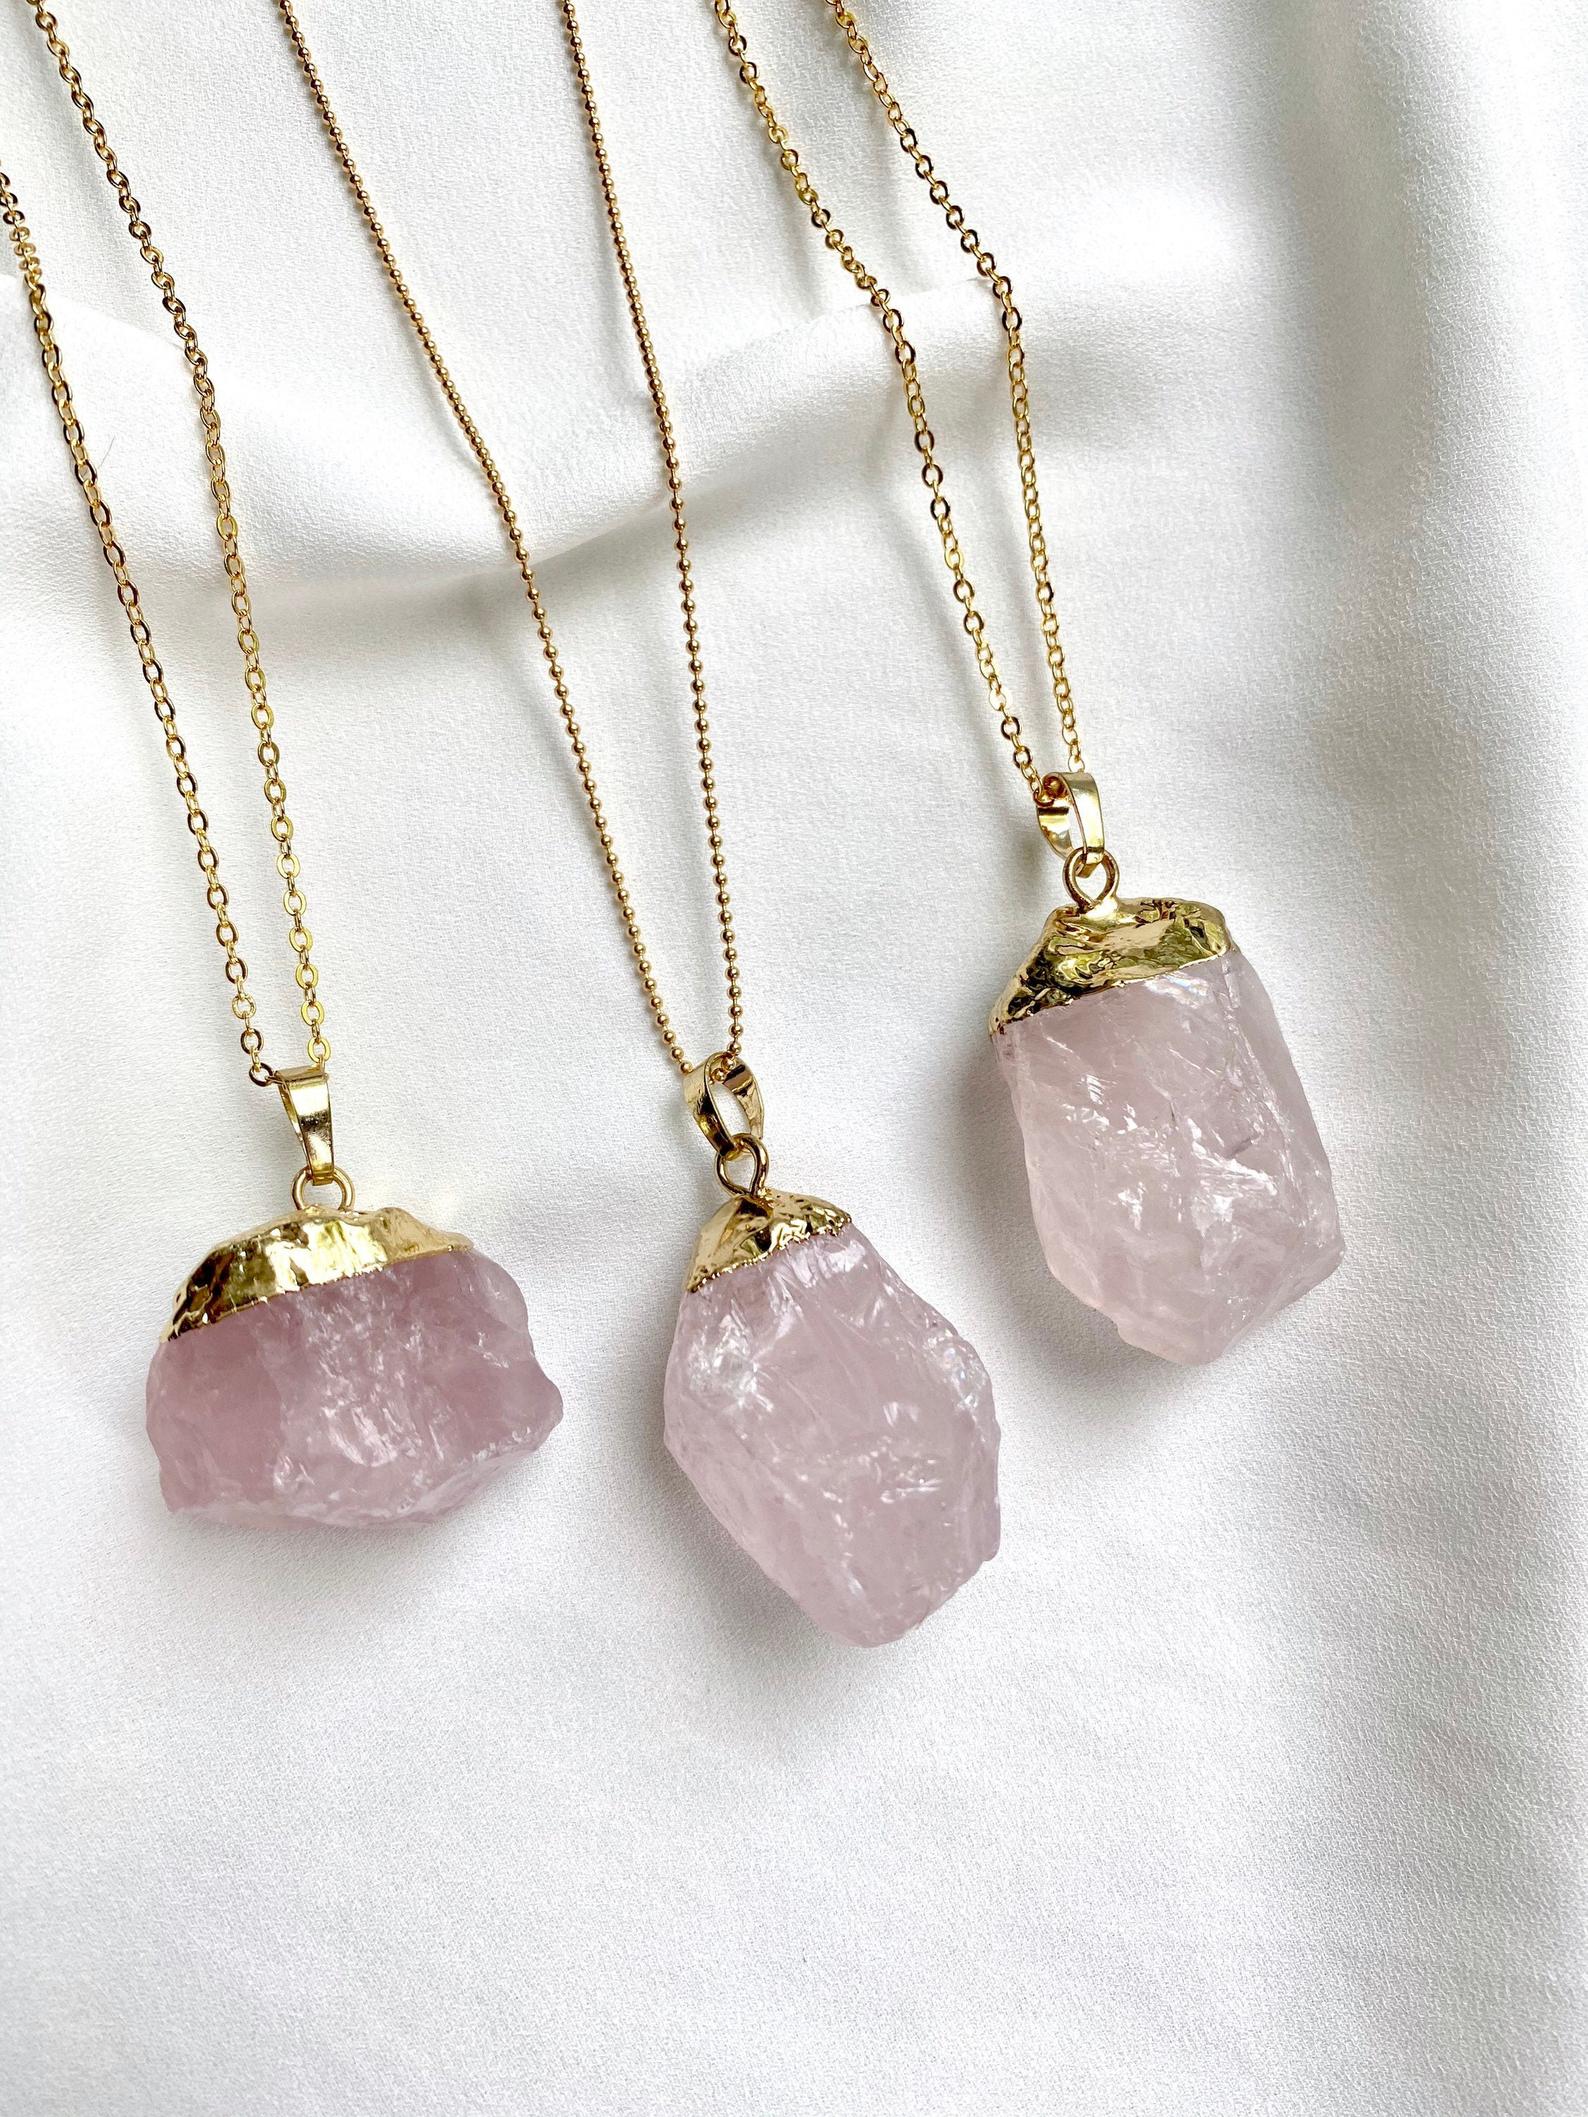 Simple Rose Quartz Necklace Sterling Silver - Mills Jewelers